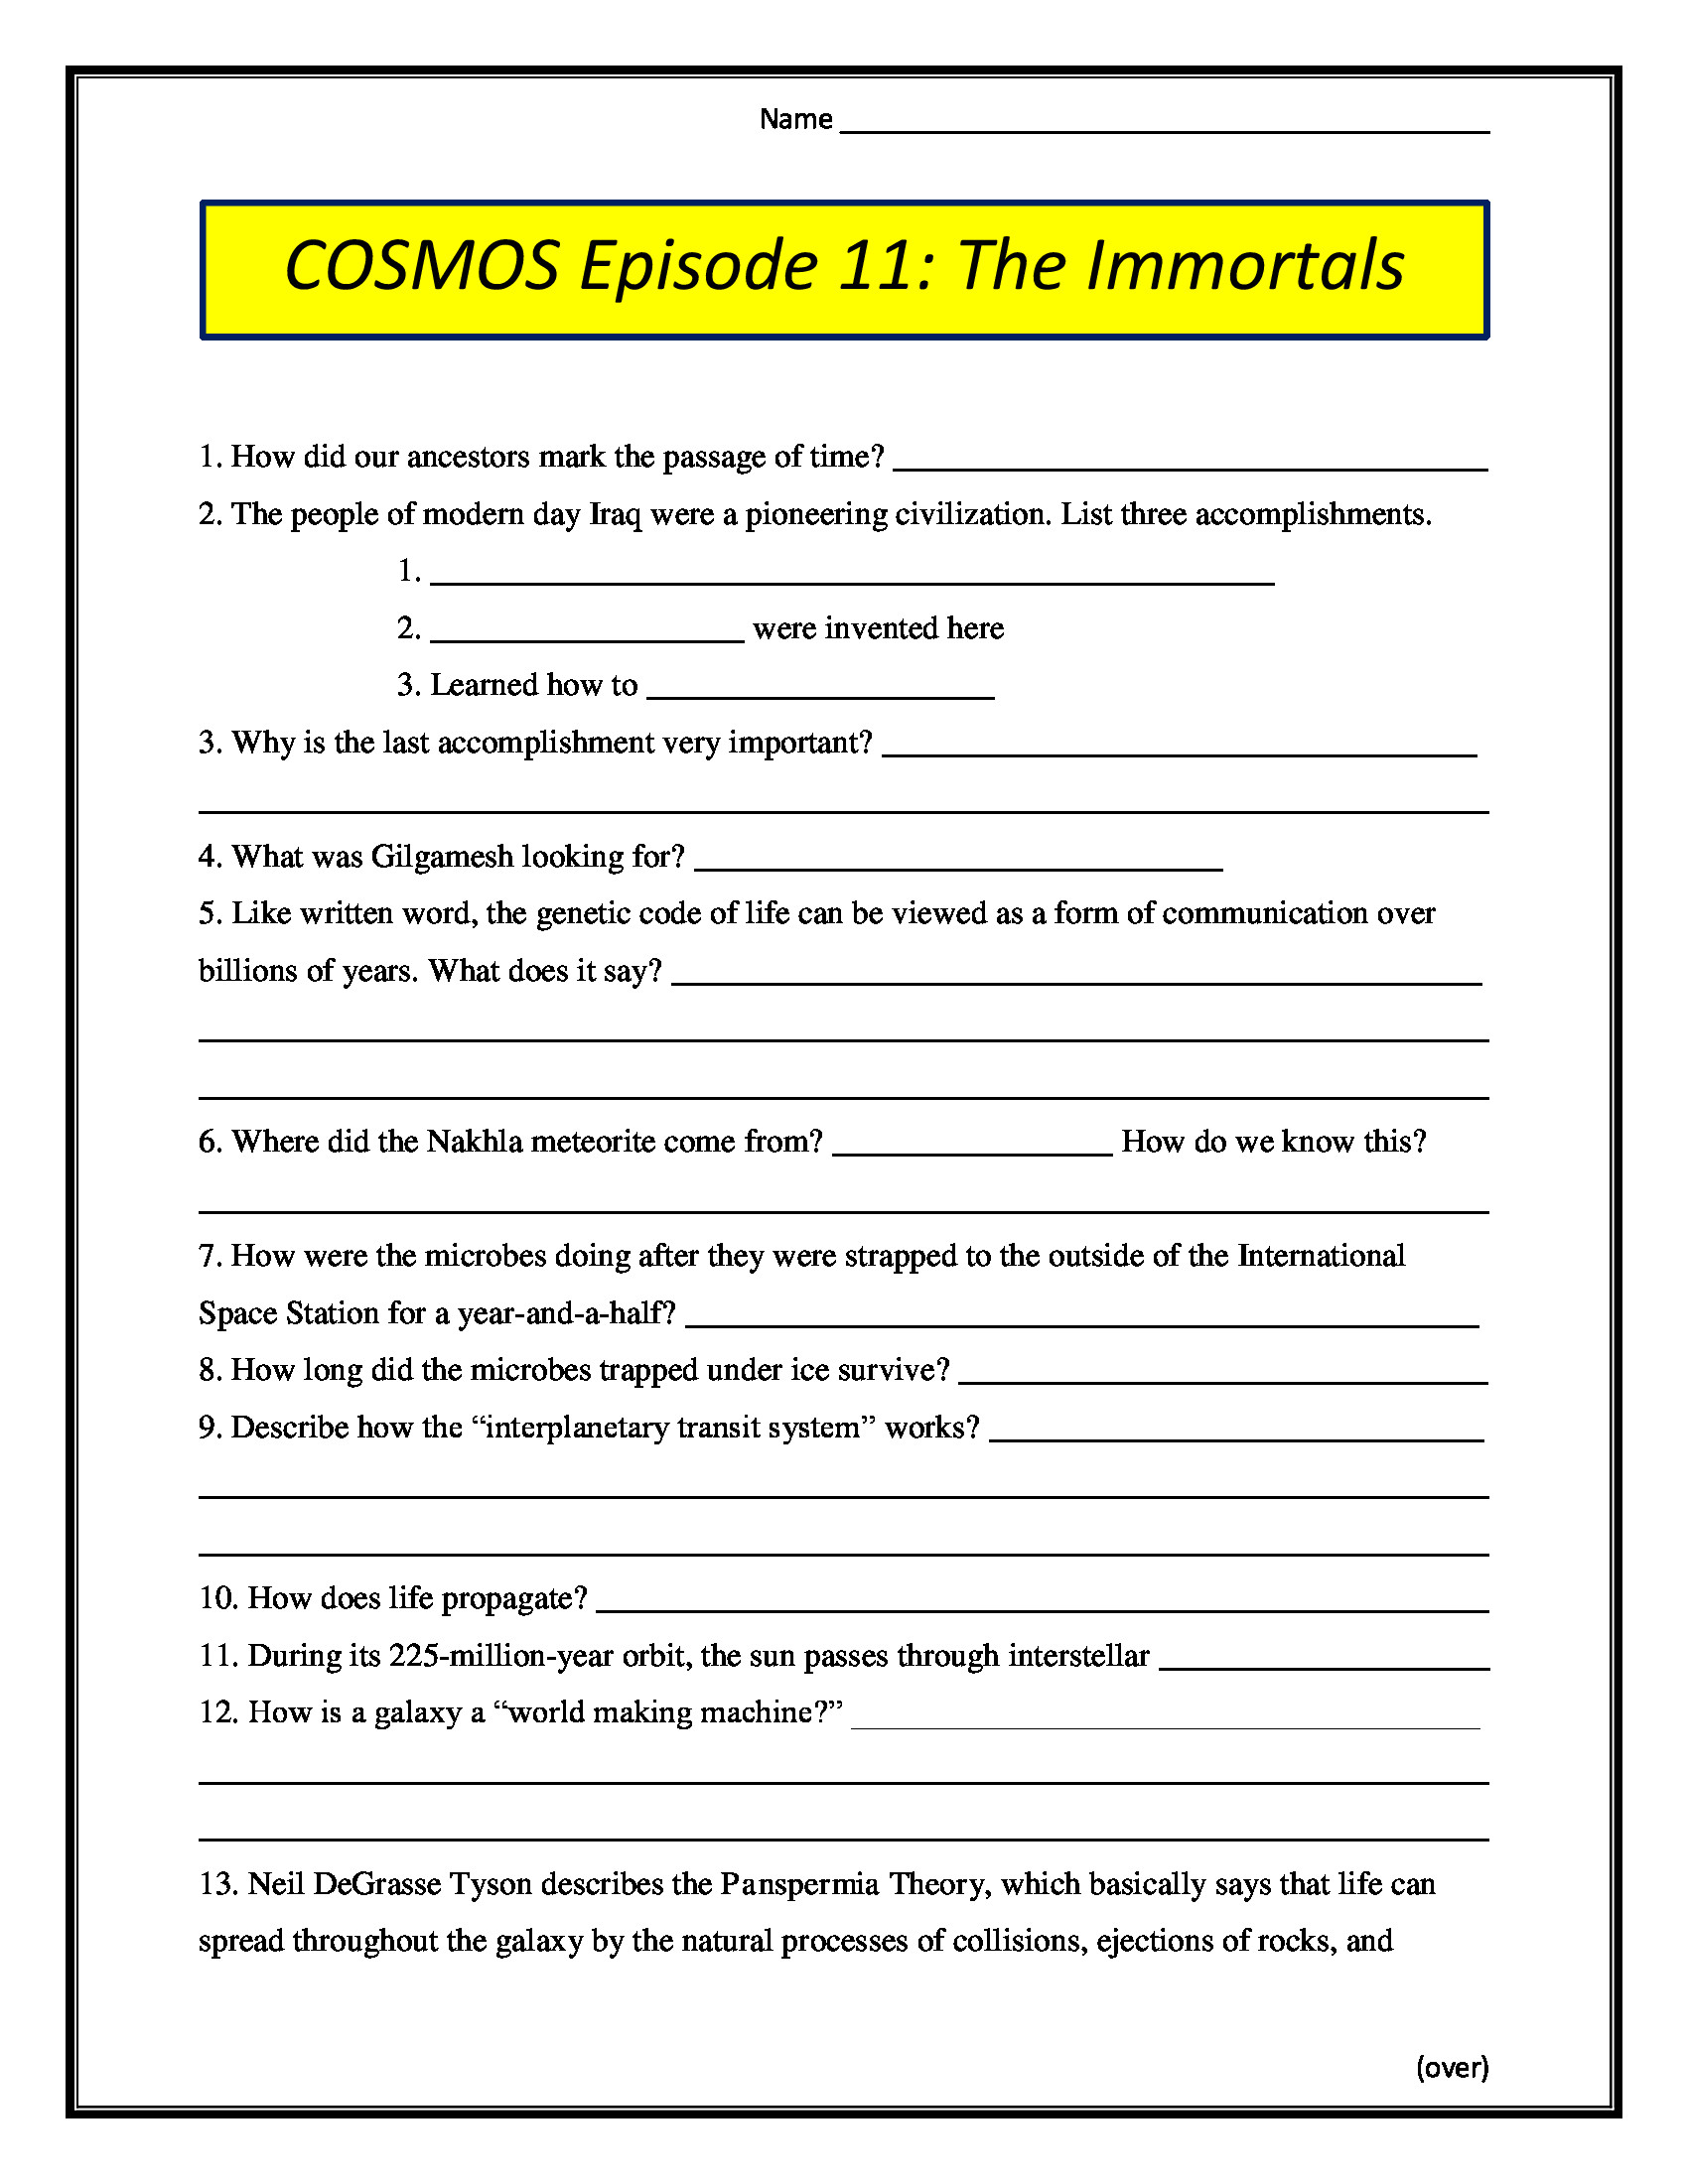 Cosmos Episode 1 Worksheet Answers Cosmos Episode 11 the Immortals Worksheet 2014